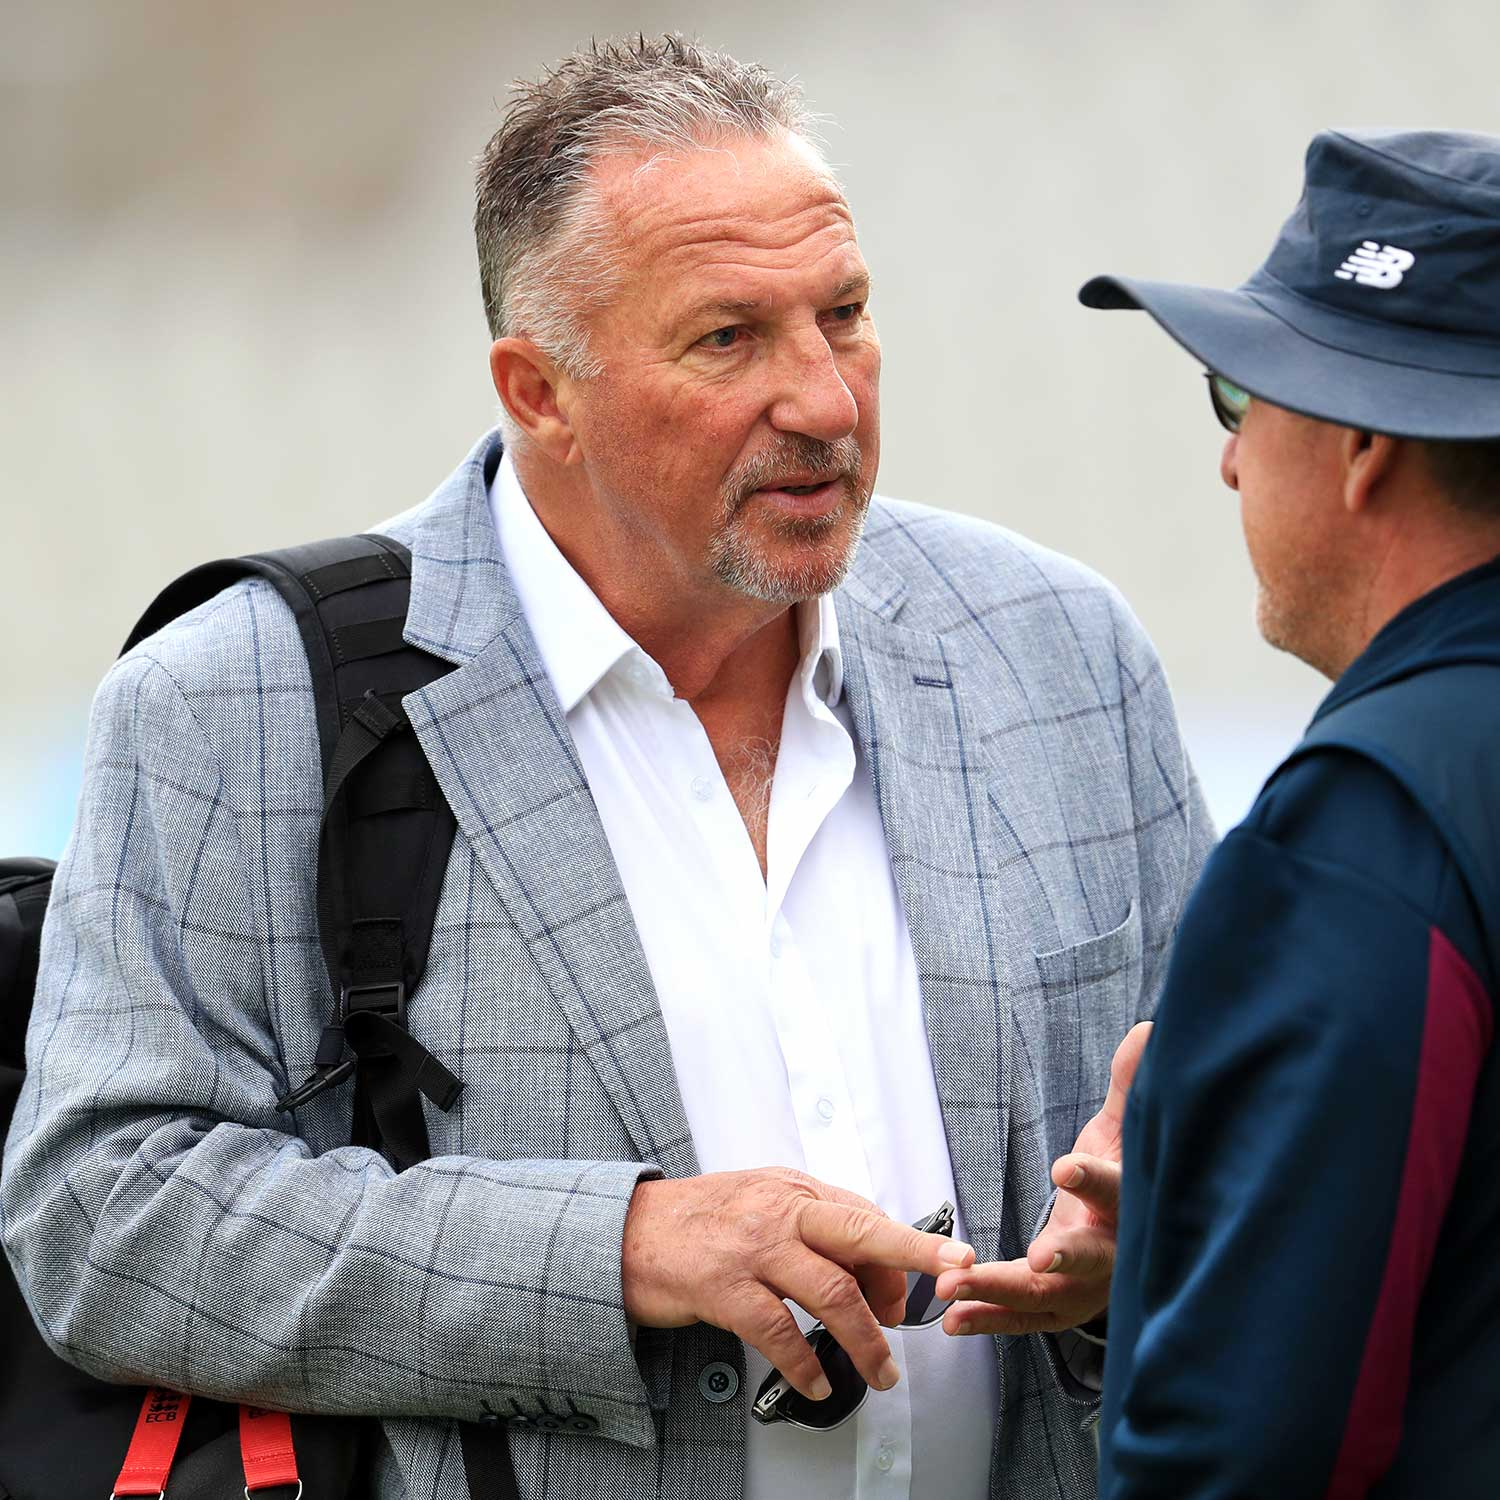 Ian Botham and the potential 'problem' if Pat Cummins becomes Australian Test captain